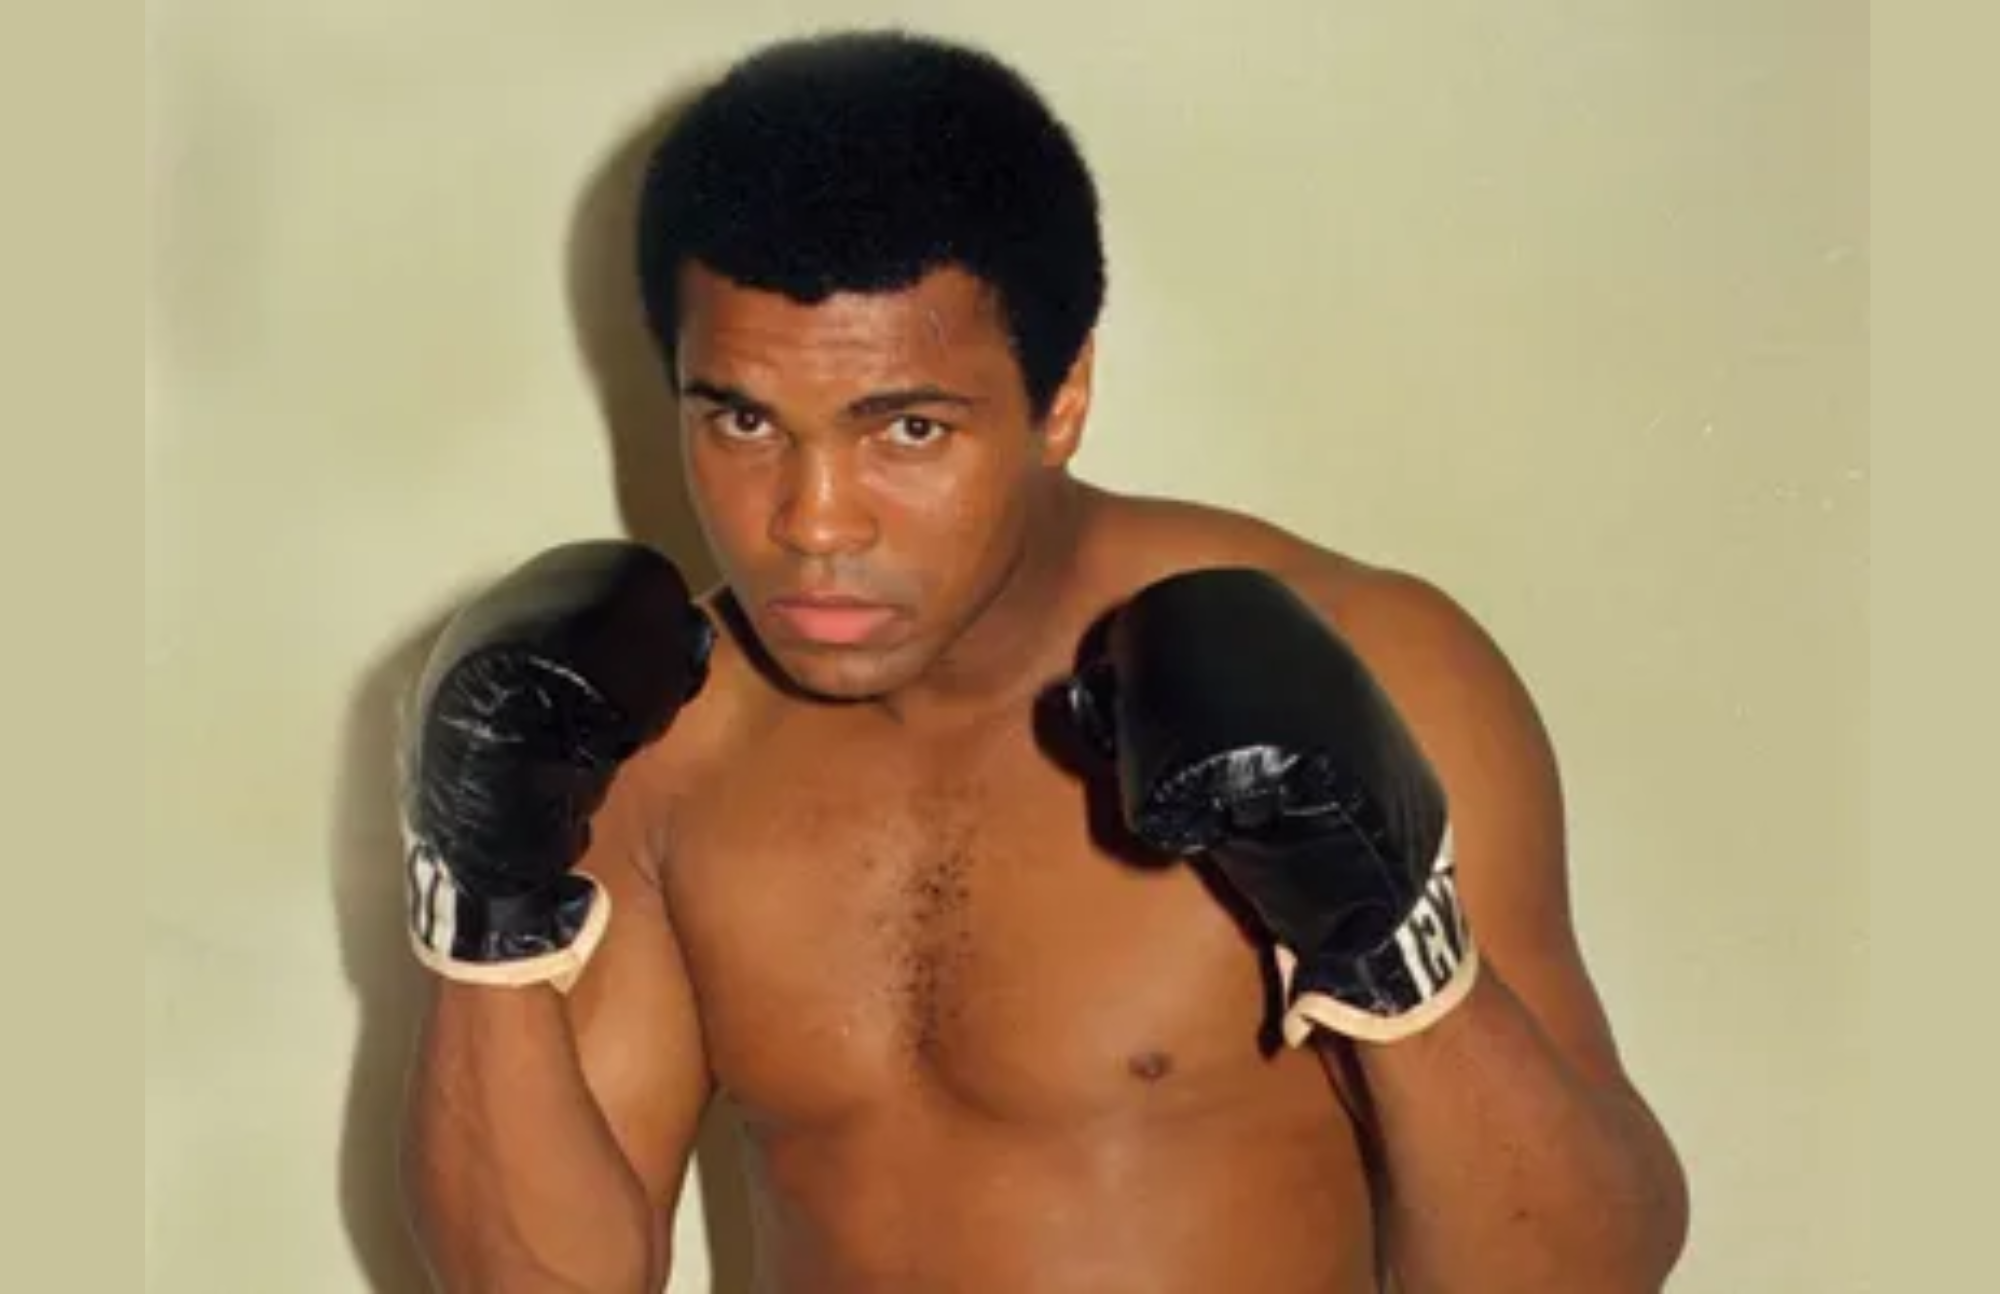 Muhammad Ali poses while wearing his black boxing gloves